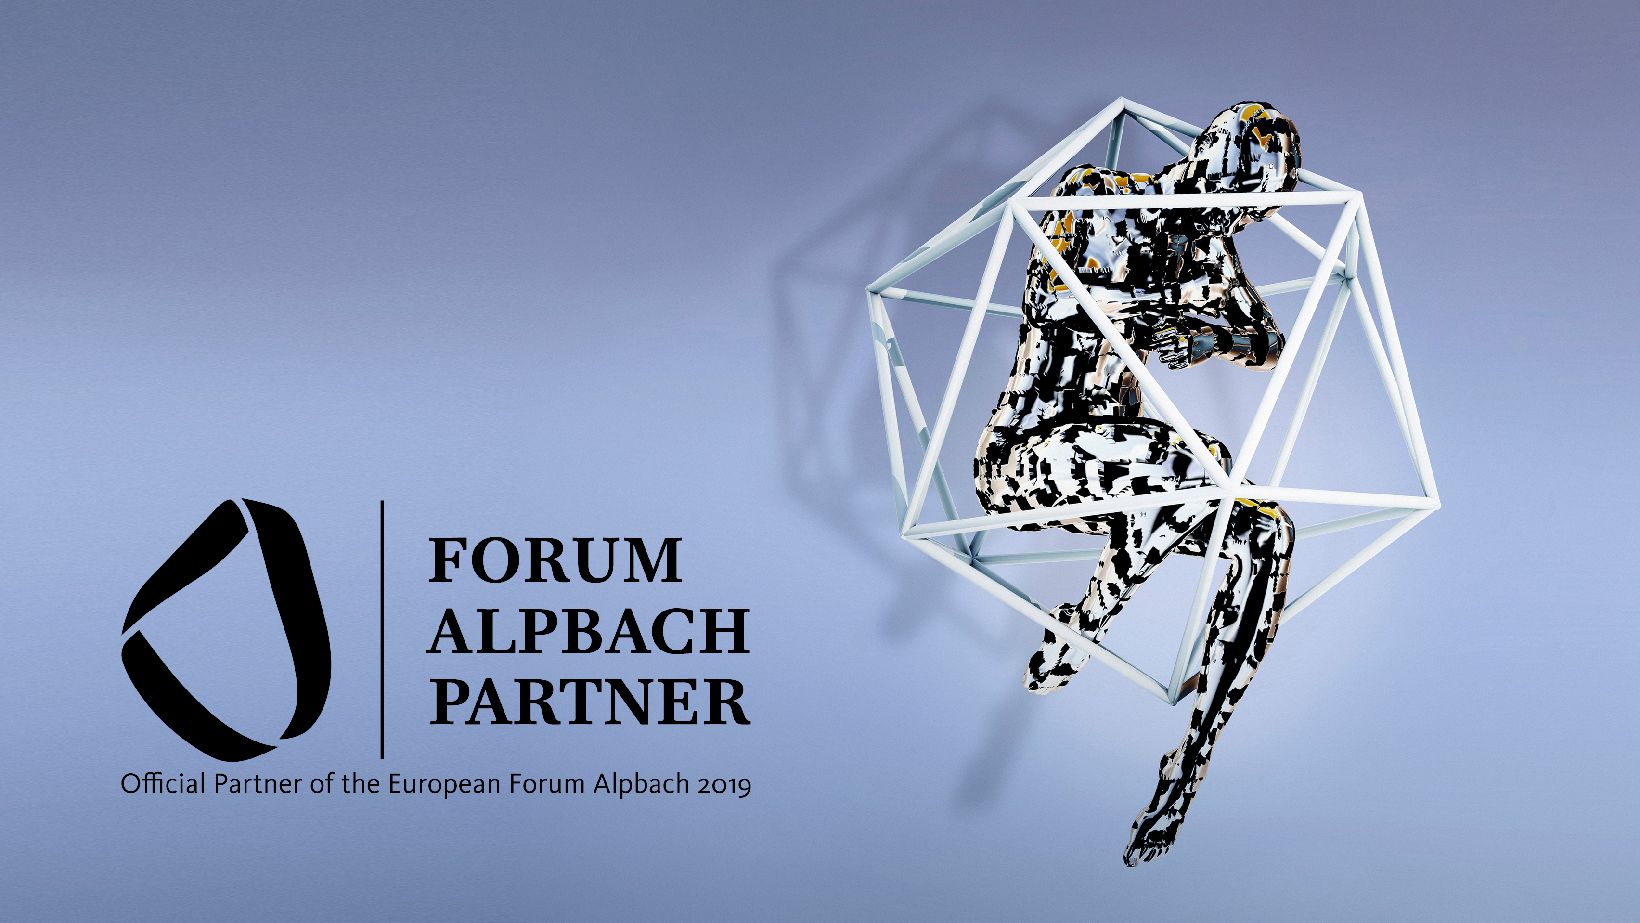 Forum Alpbach Partnerlogo with the events campaign image